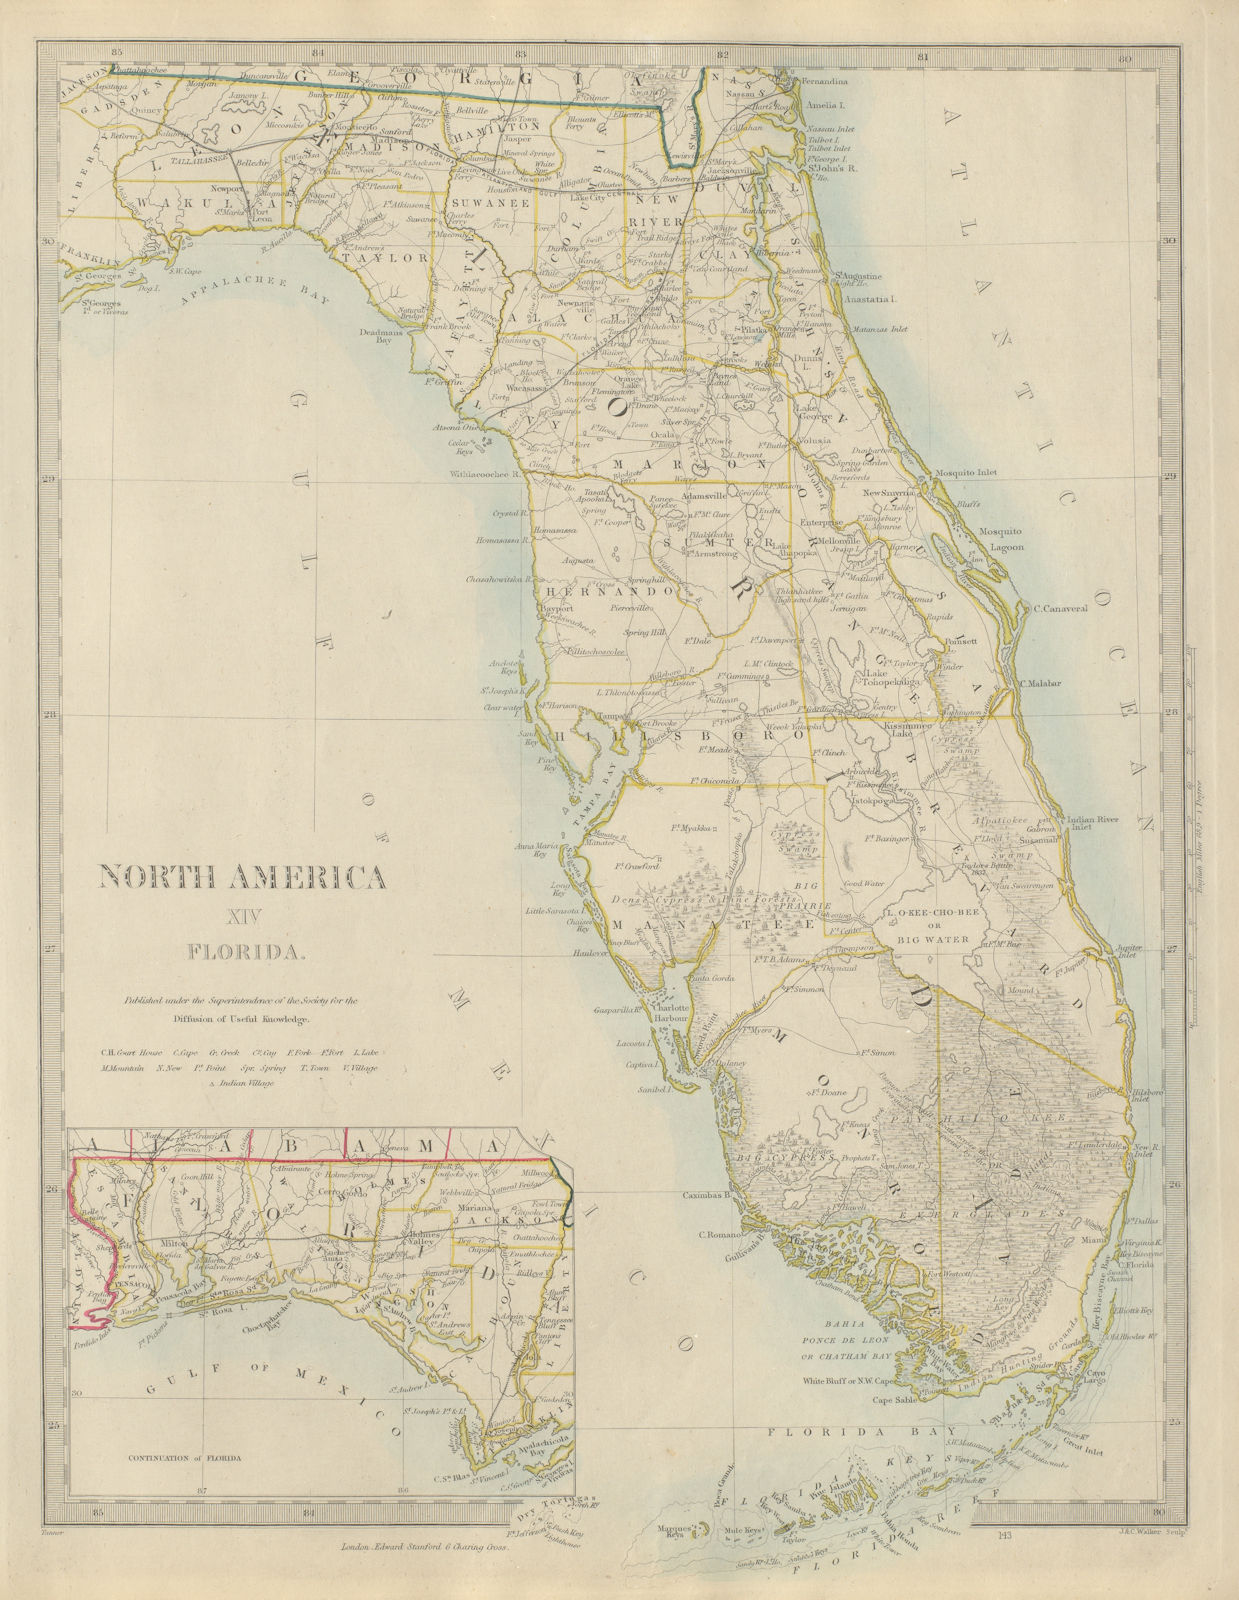 FLORIDA state map showing forts & railways. Miami is marked. SDUK 1874 old